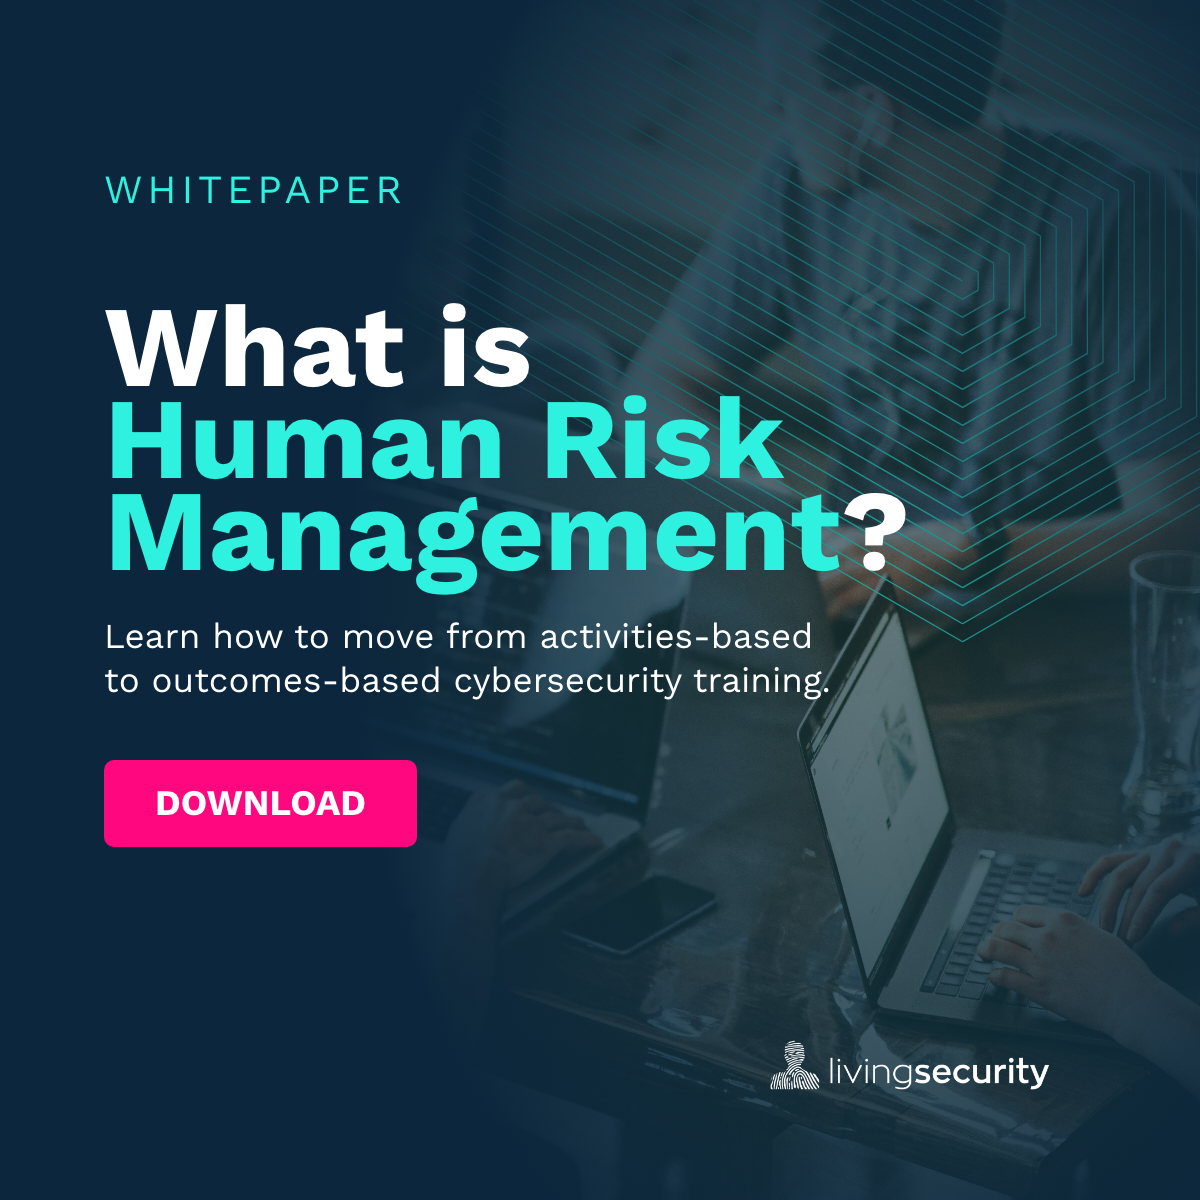 What is Human Risk Management? Whitepaper